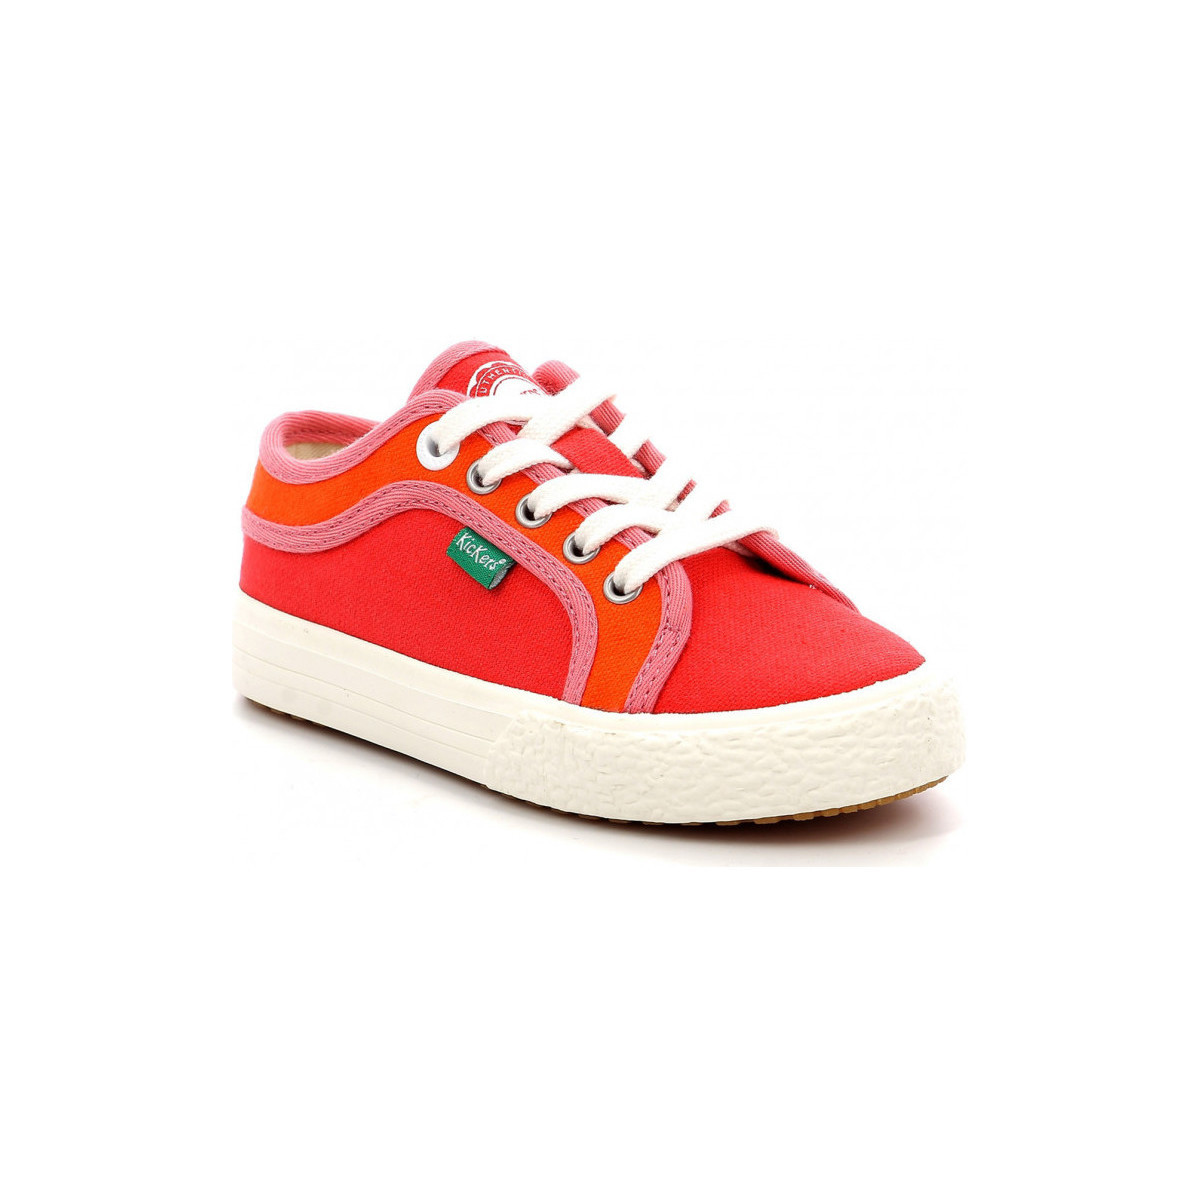 Chaussures Enfant Baskets basses Kickers Geeck Rouge